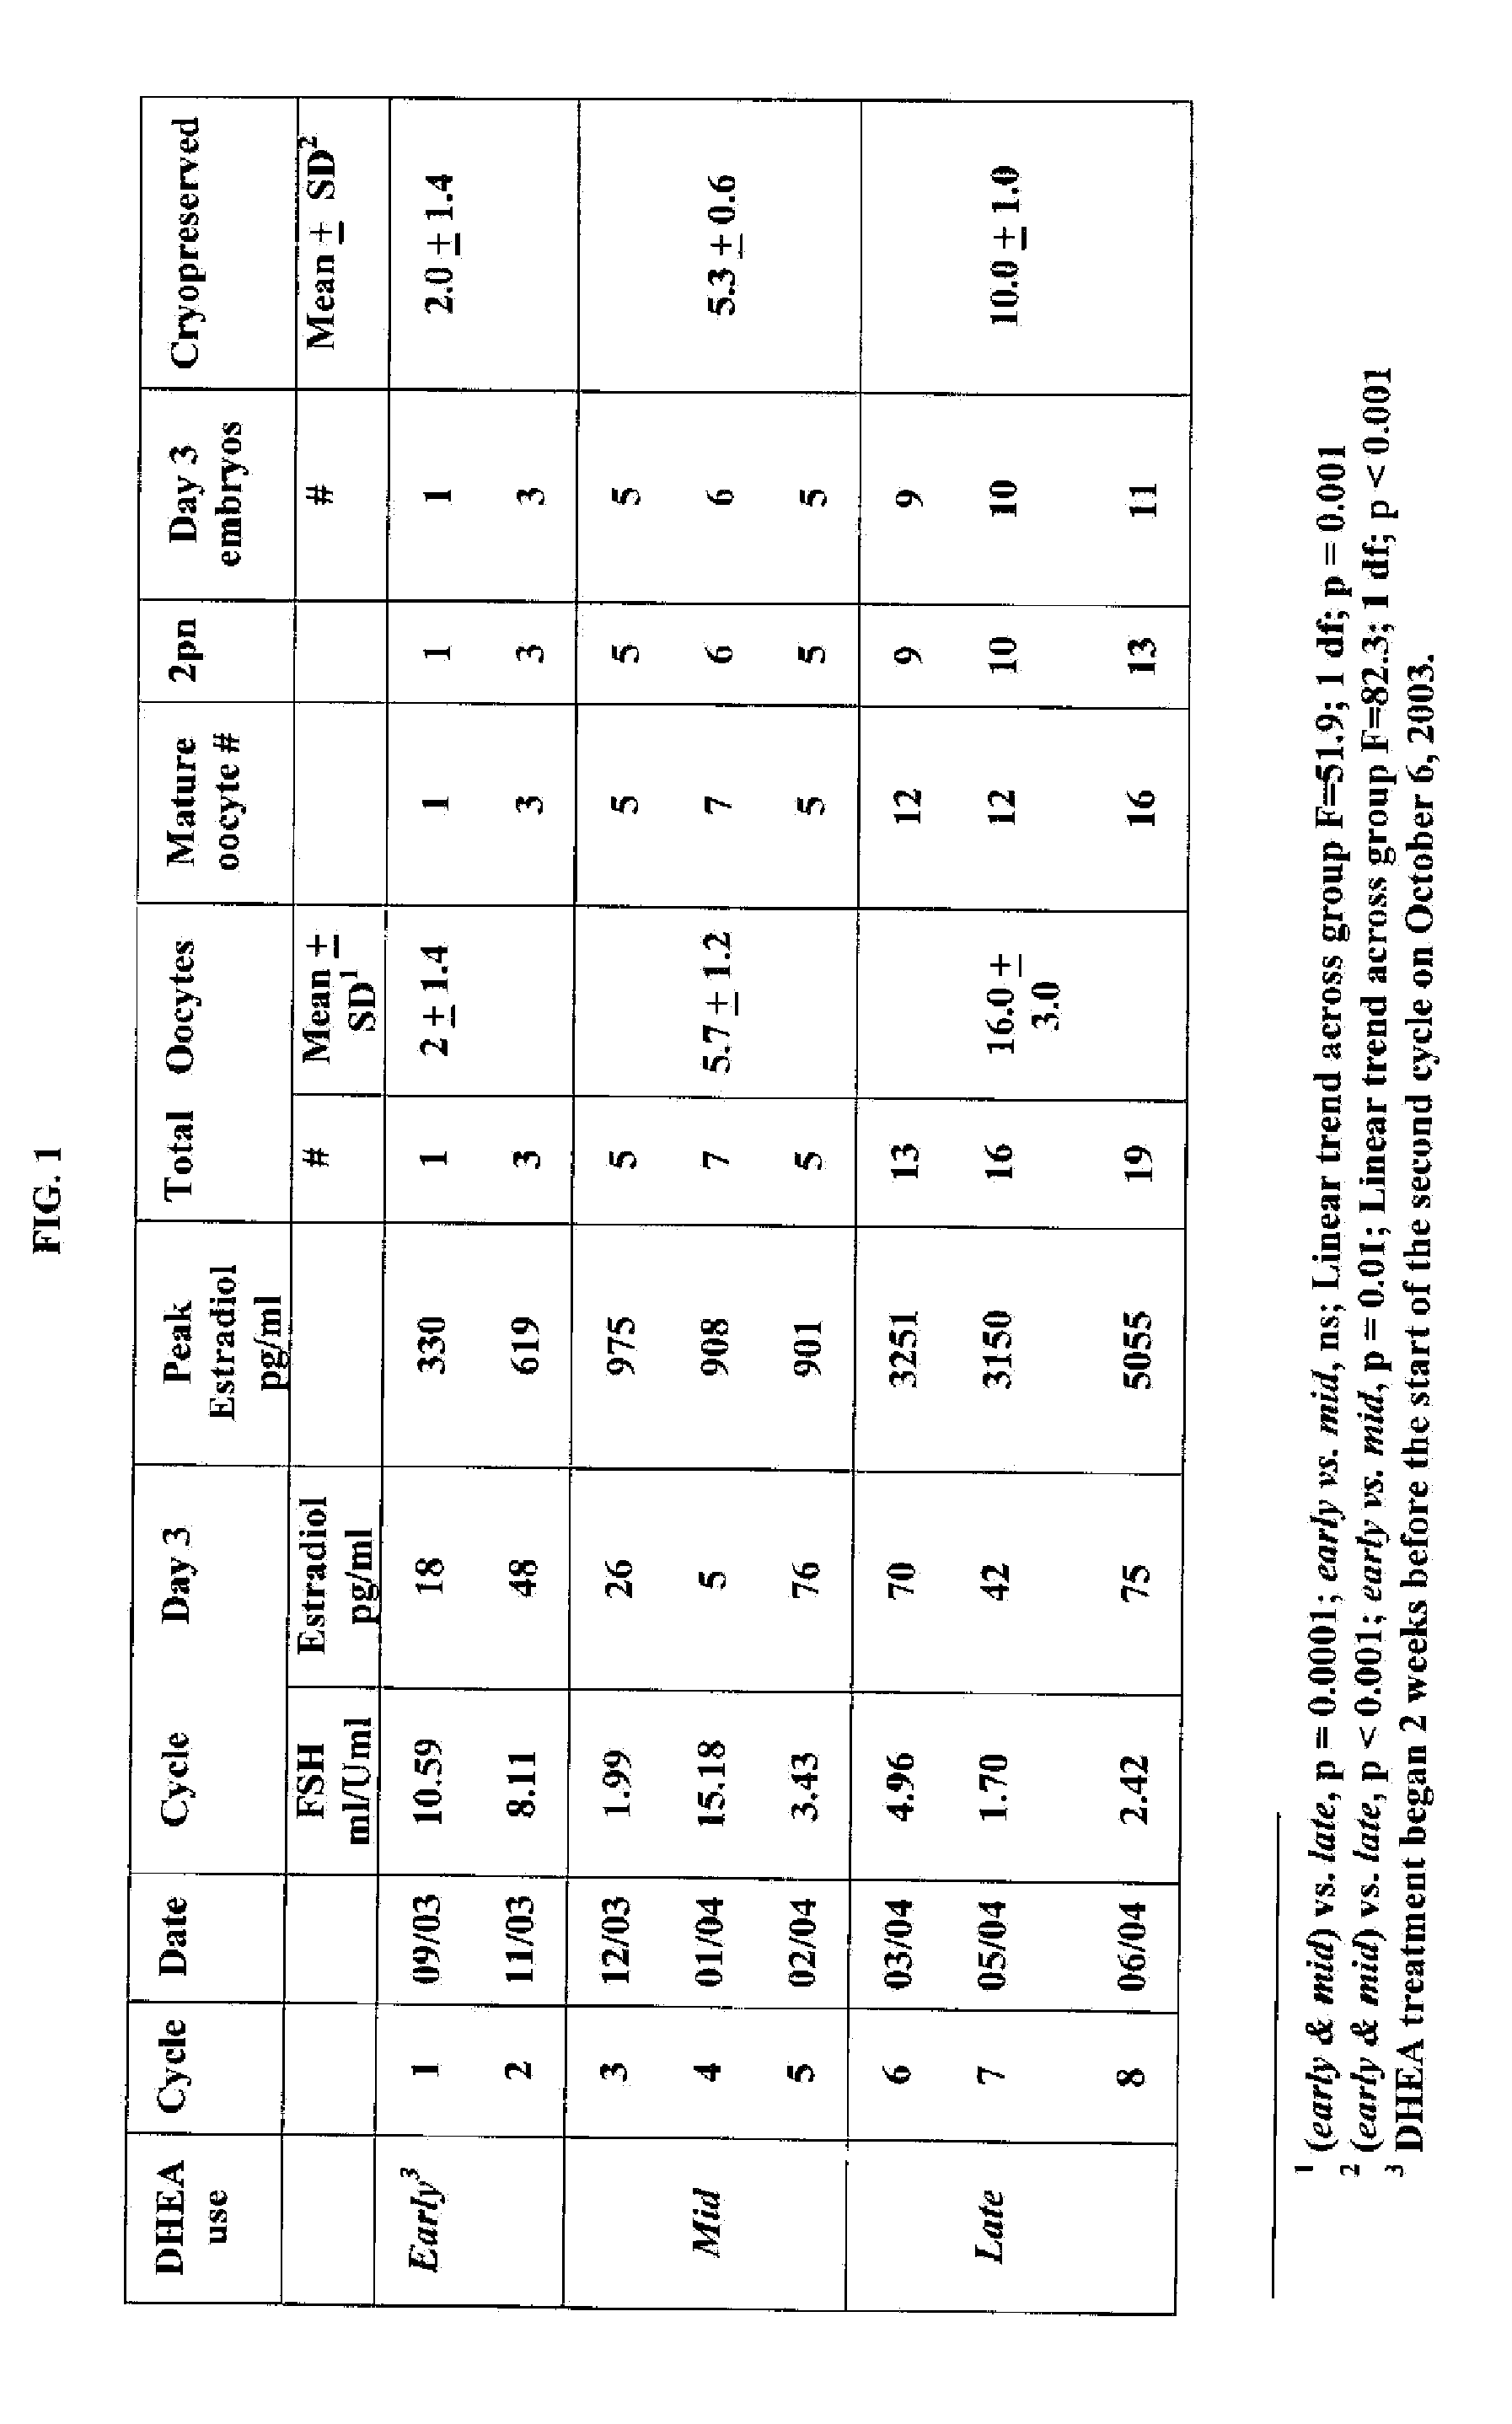 Androgen Treatment in Females